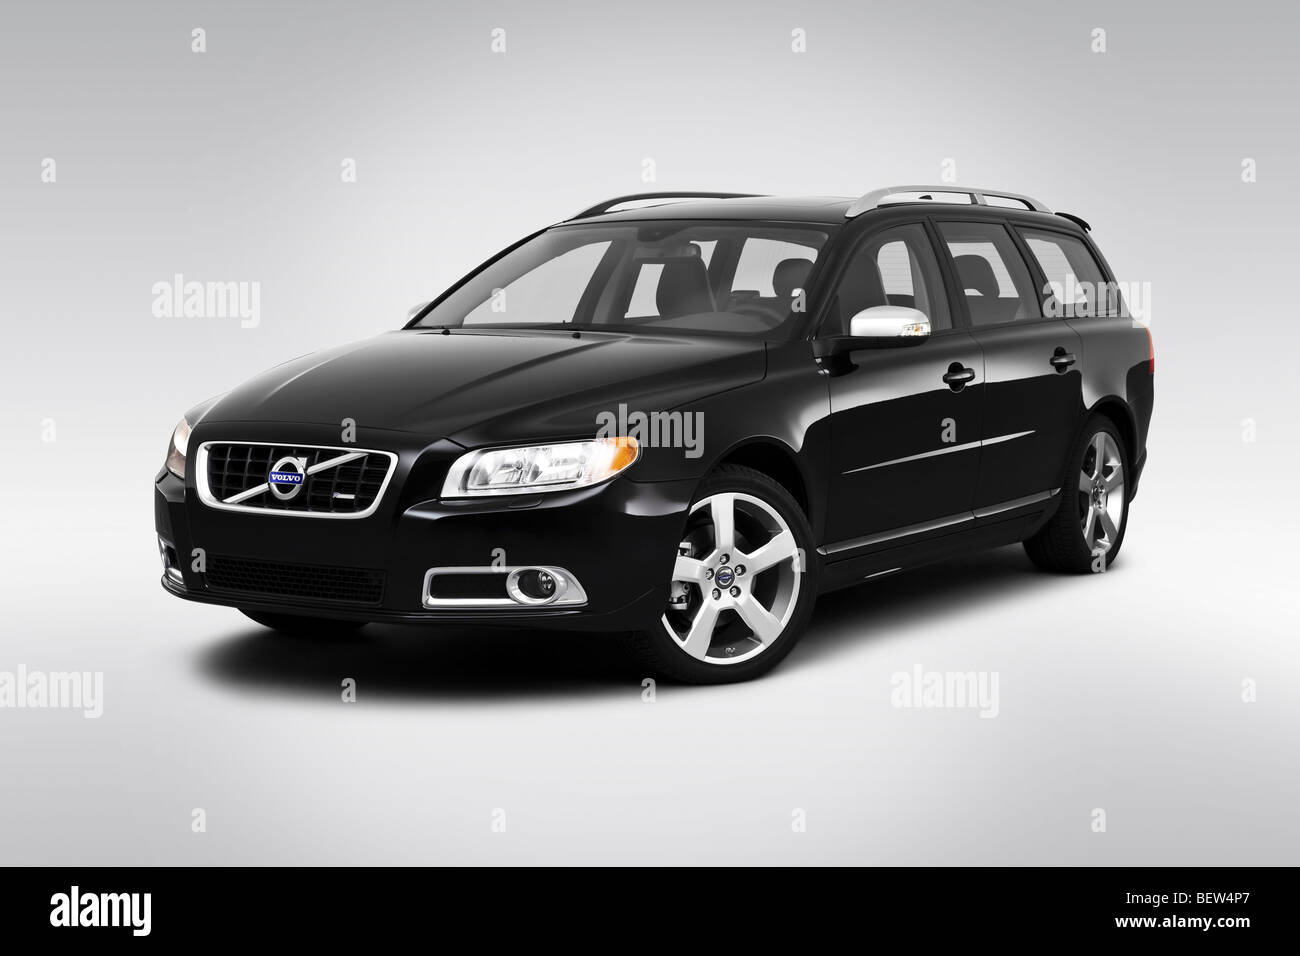 2010 Volvo V70 3.2 A SR in Black - Front angle view Stock Photo - Alamy